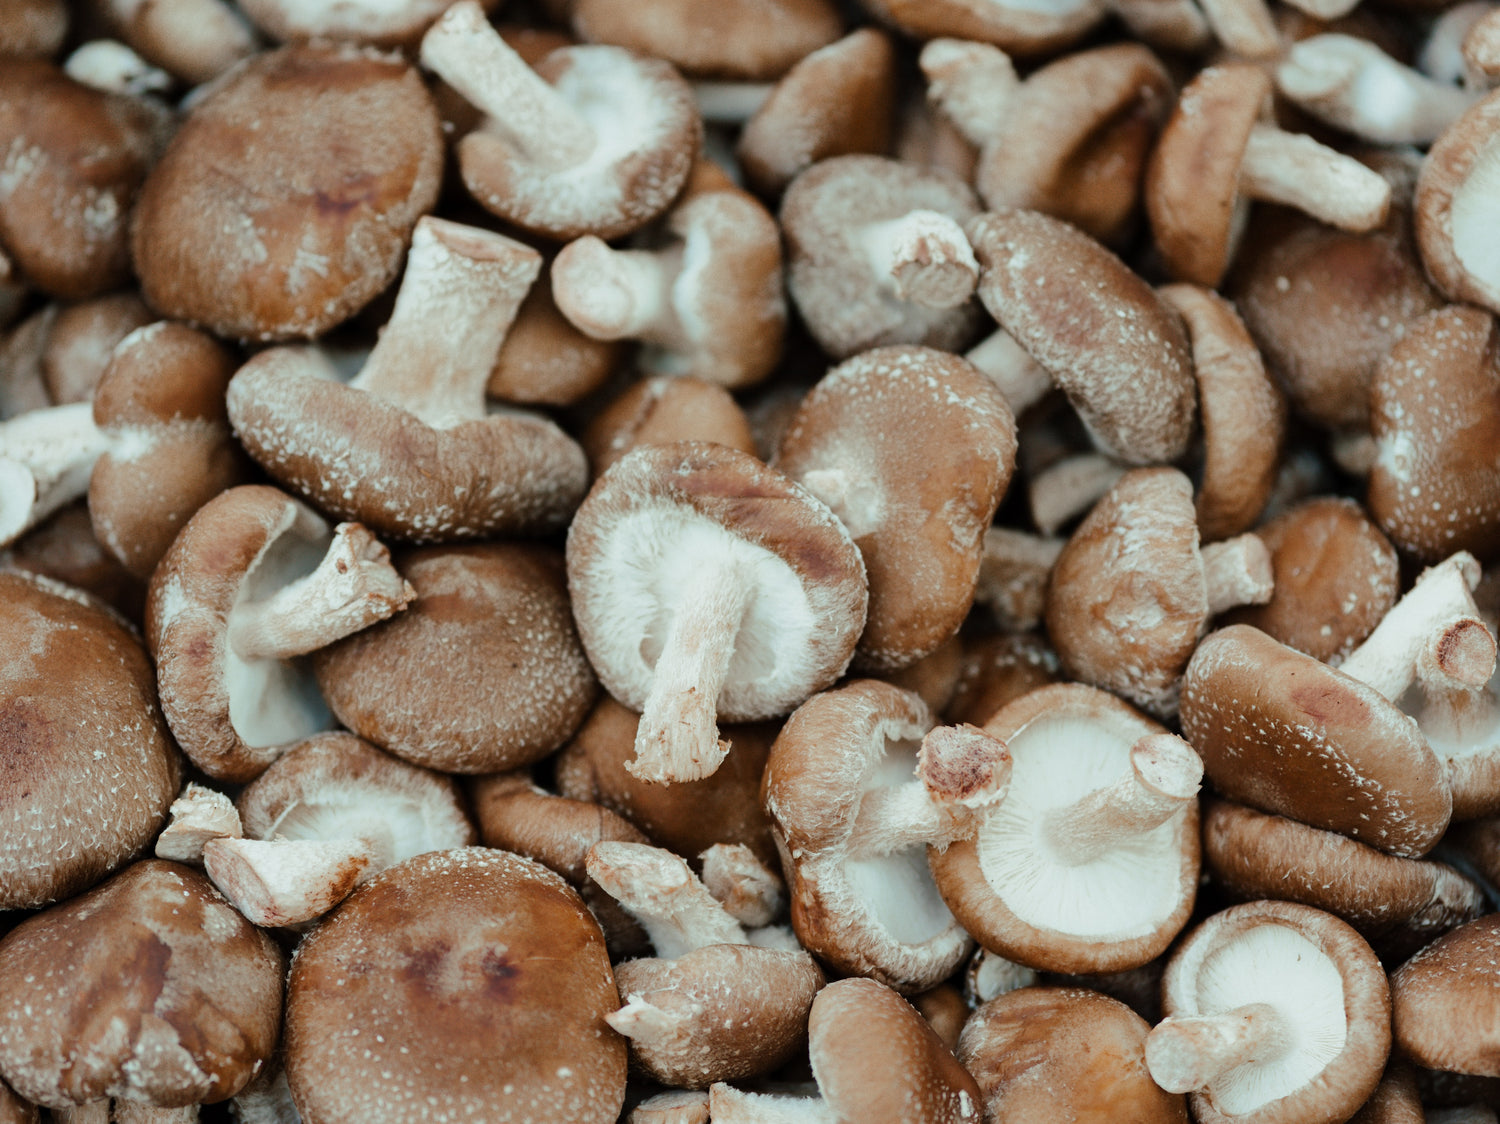 A close-up of a bunch of harvested shiitake mushrooms from Soil and Soul Farm, with brown caps and white stems visible.